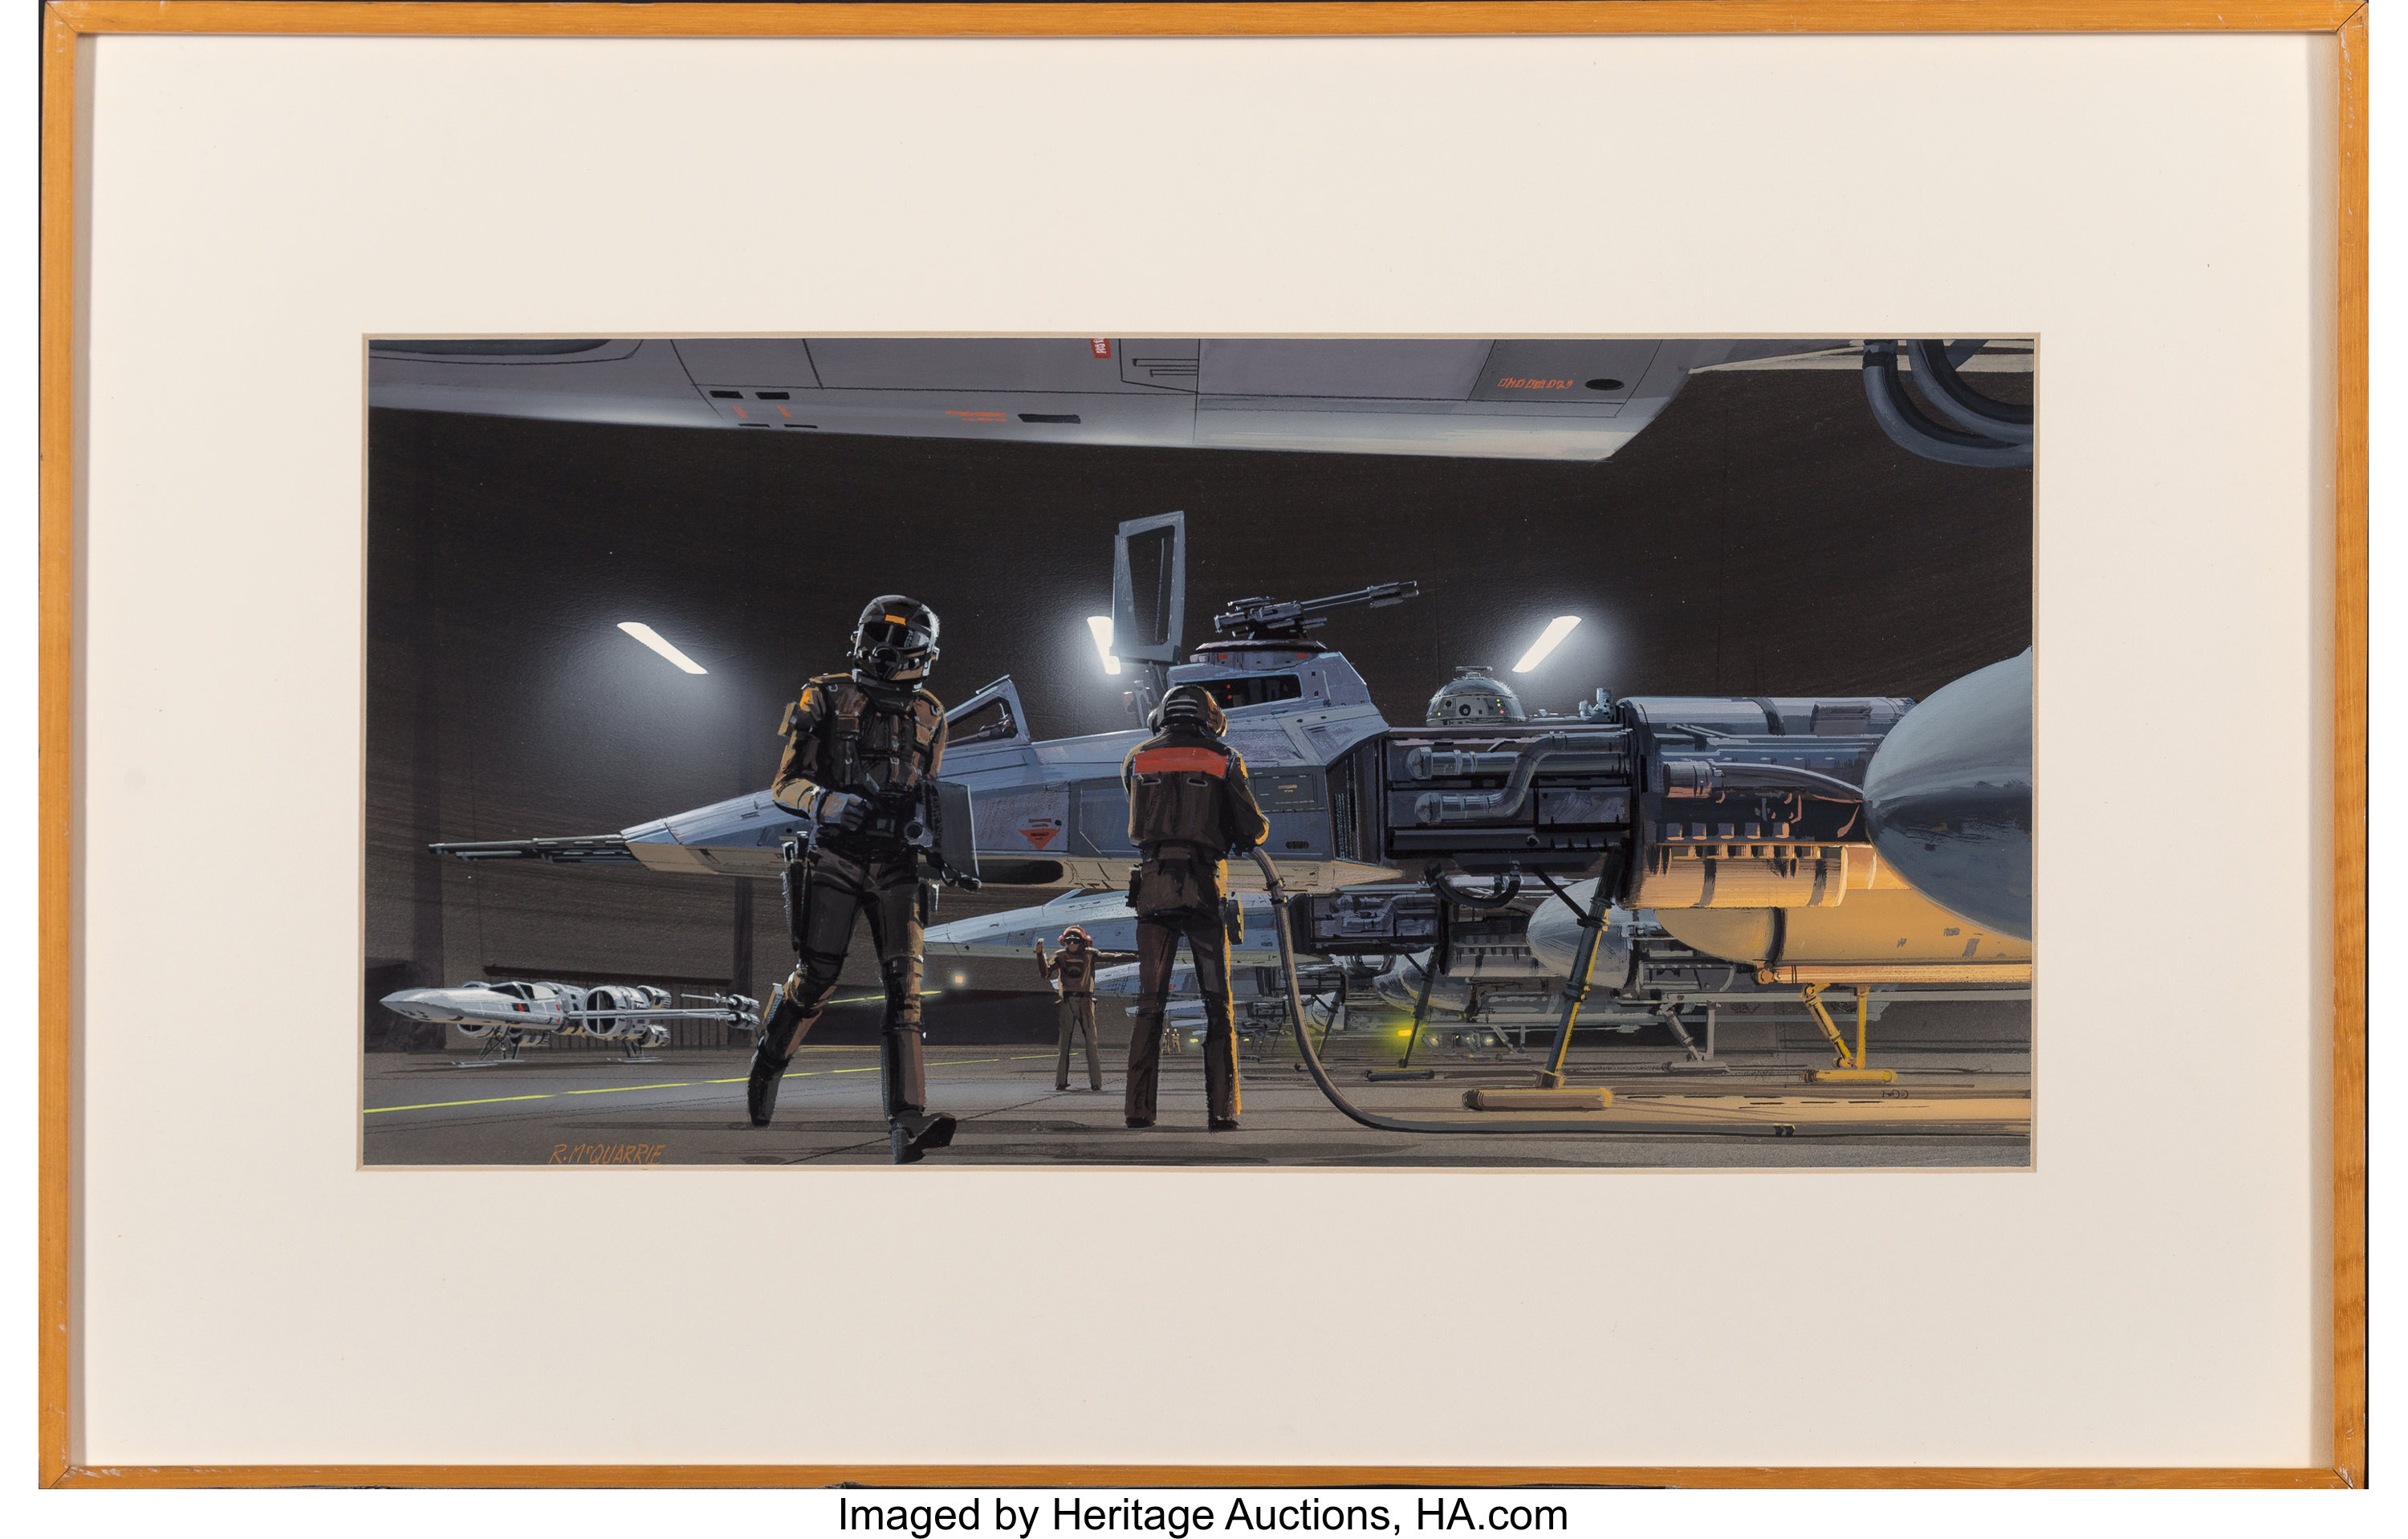 Y-Wing Fighters in the Rebel Hangar, 1976, Ralph McQuarrie Image credit Heritage Auctions